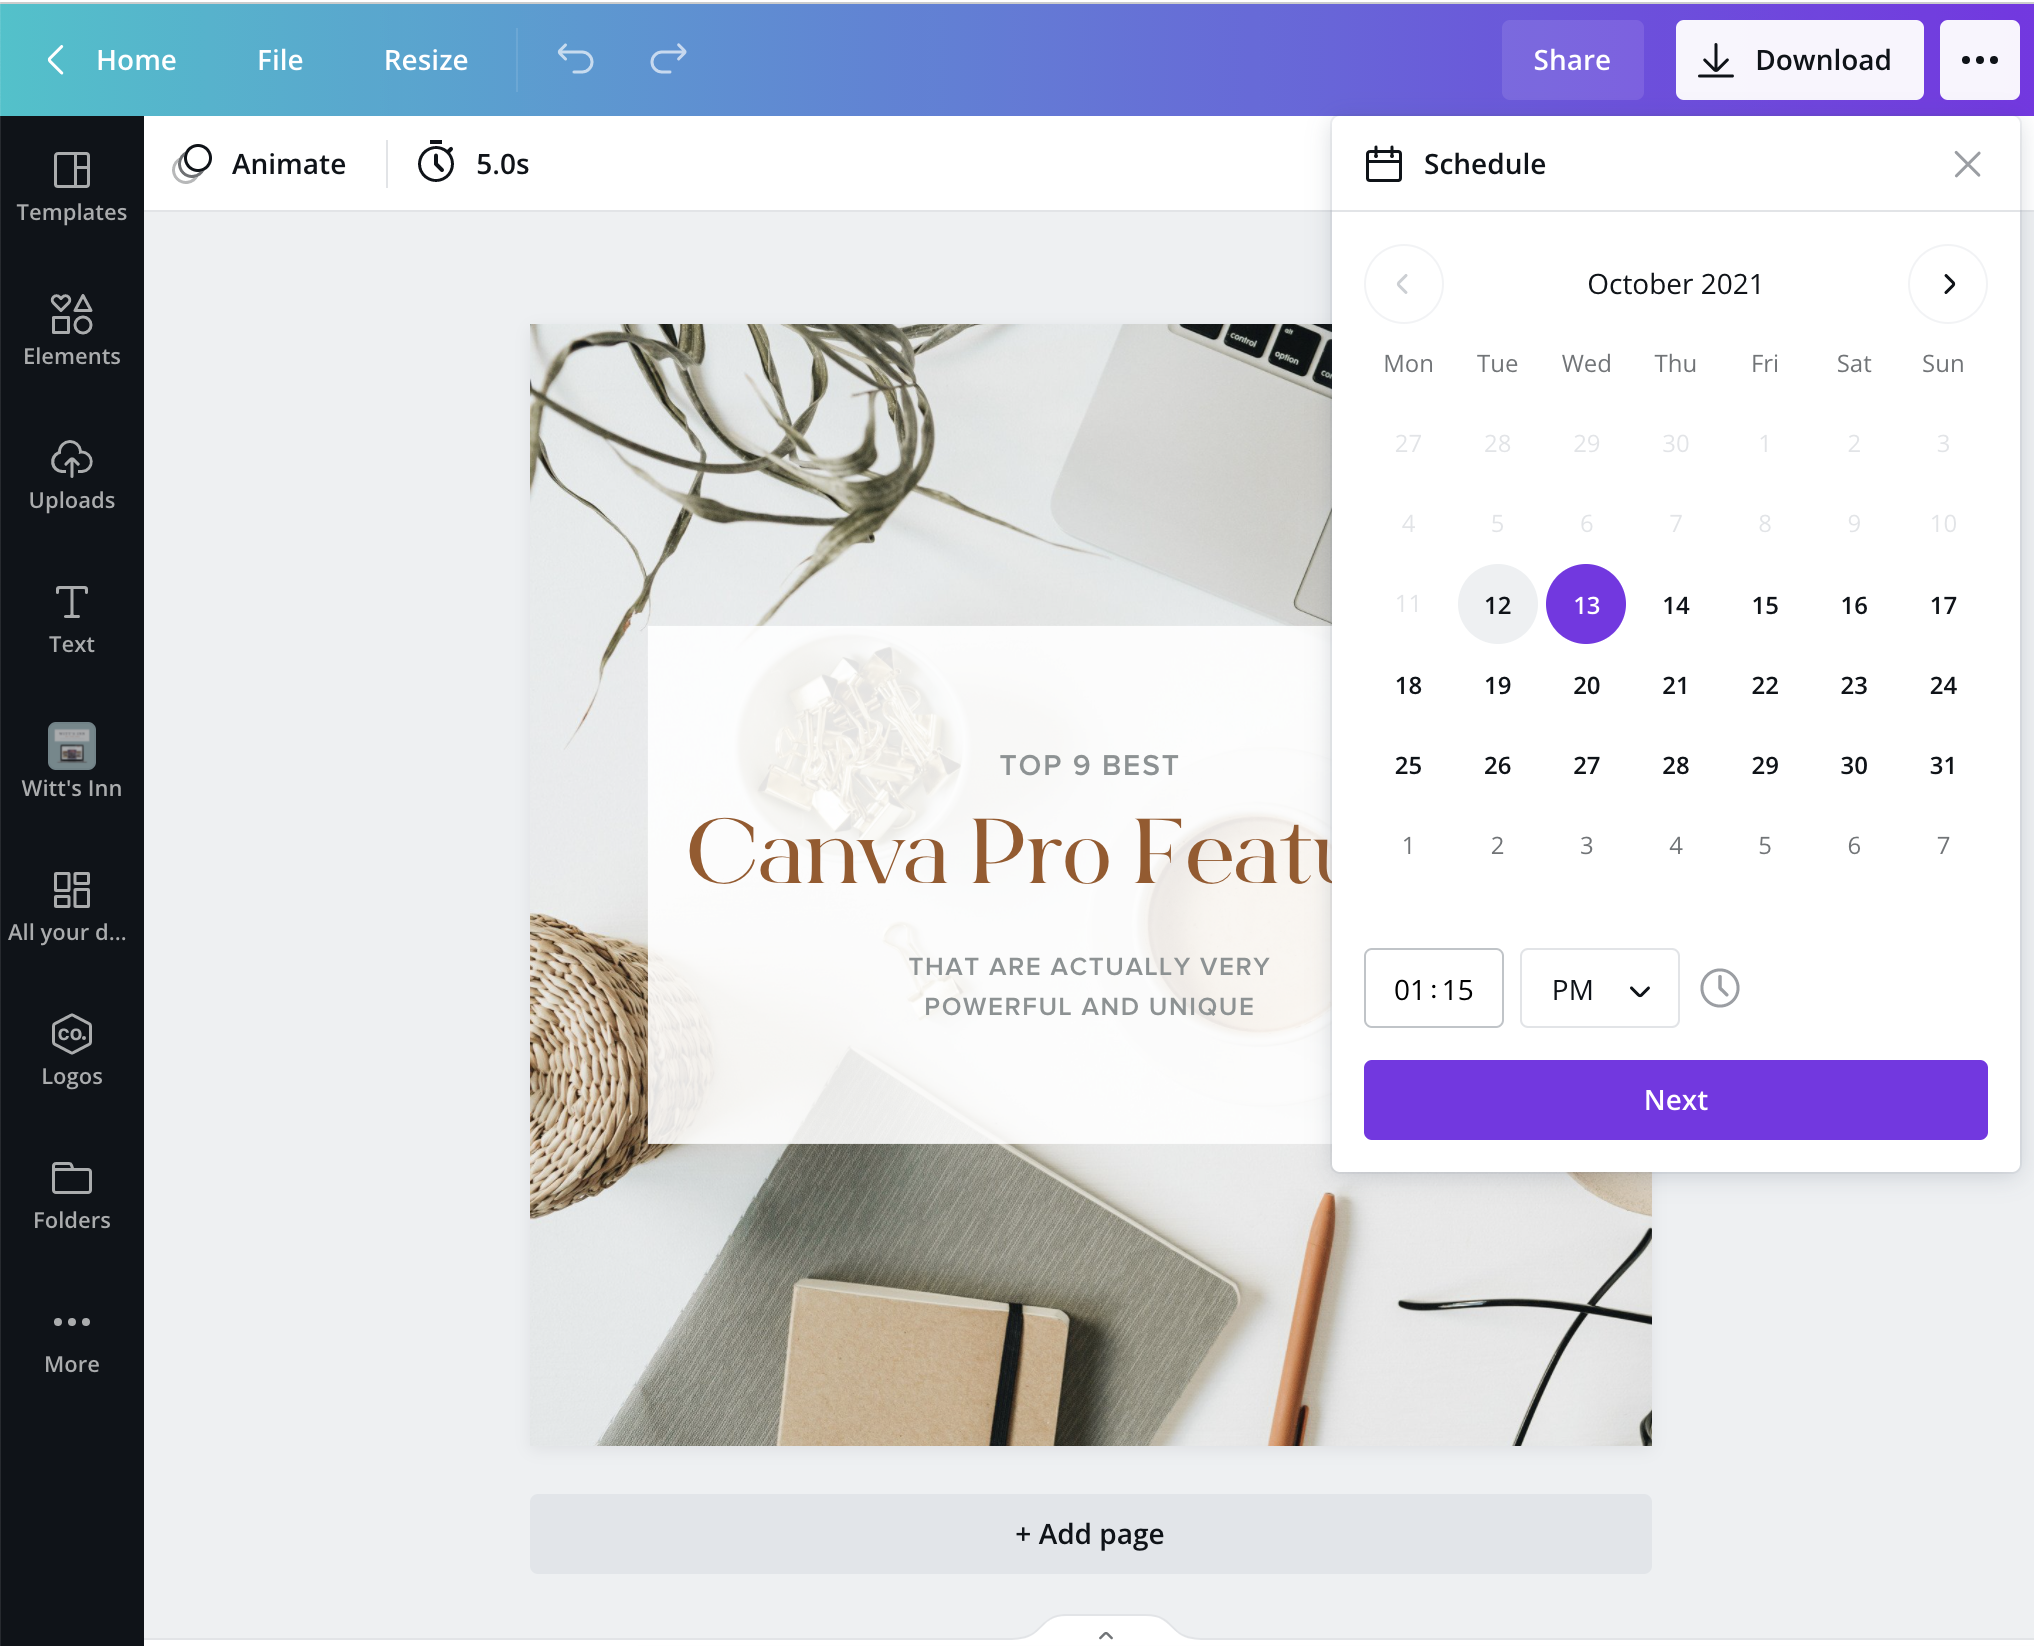 Create, schedule, and share with Canva Pro to many social media platforms.